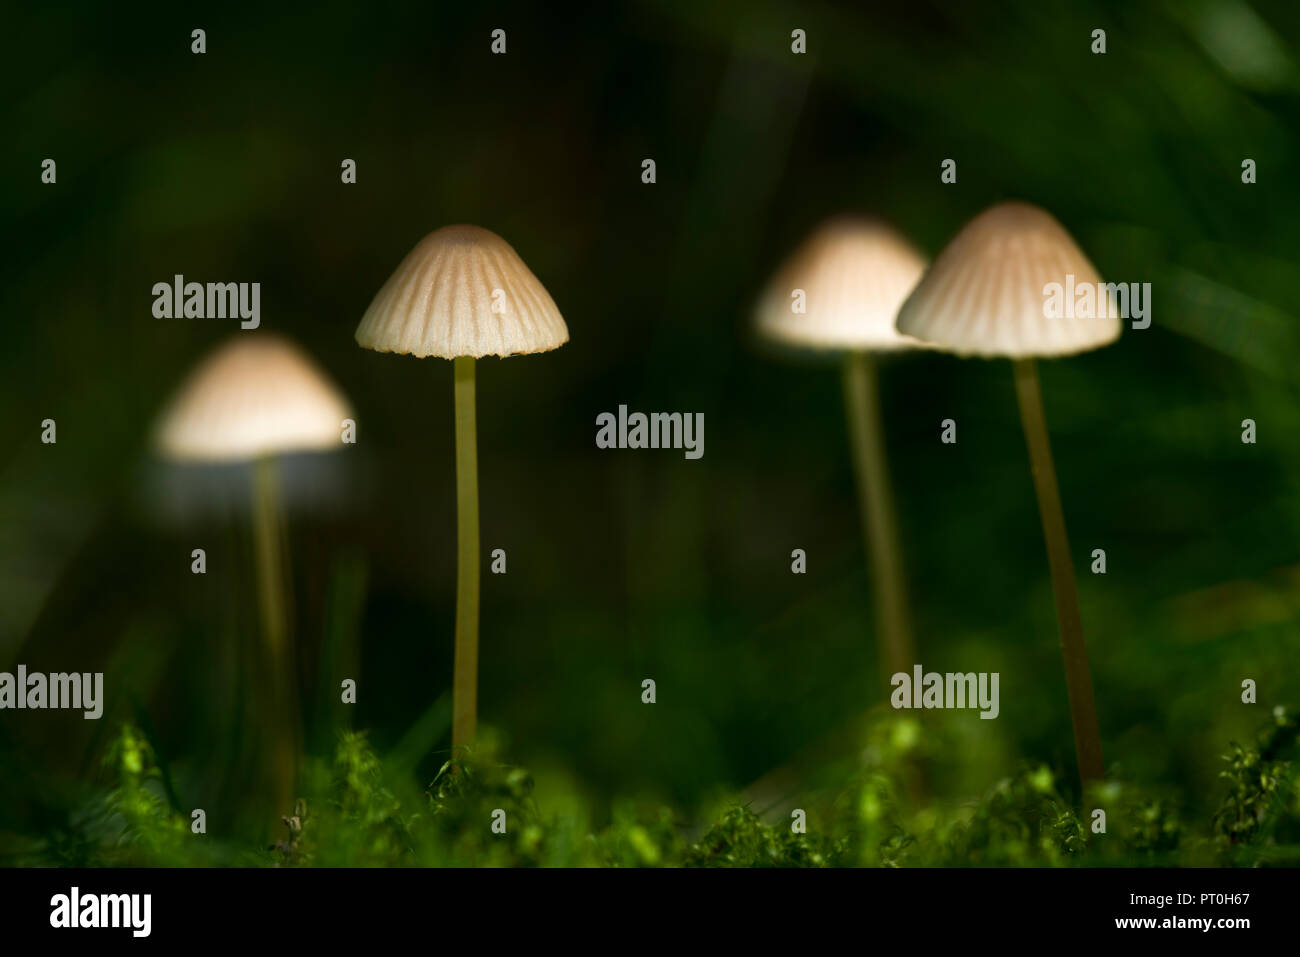 A troop of Snapping Bonnet (Mycena vitilis) mushrooms growing on a woodland floor. Stockhill Wood, Somerset, England. Stock Photo